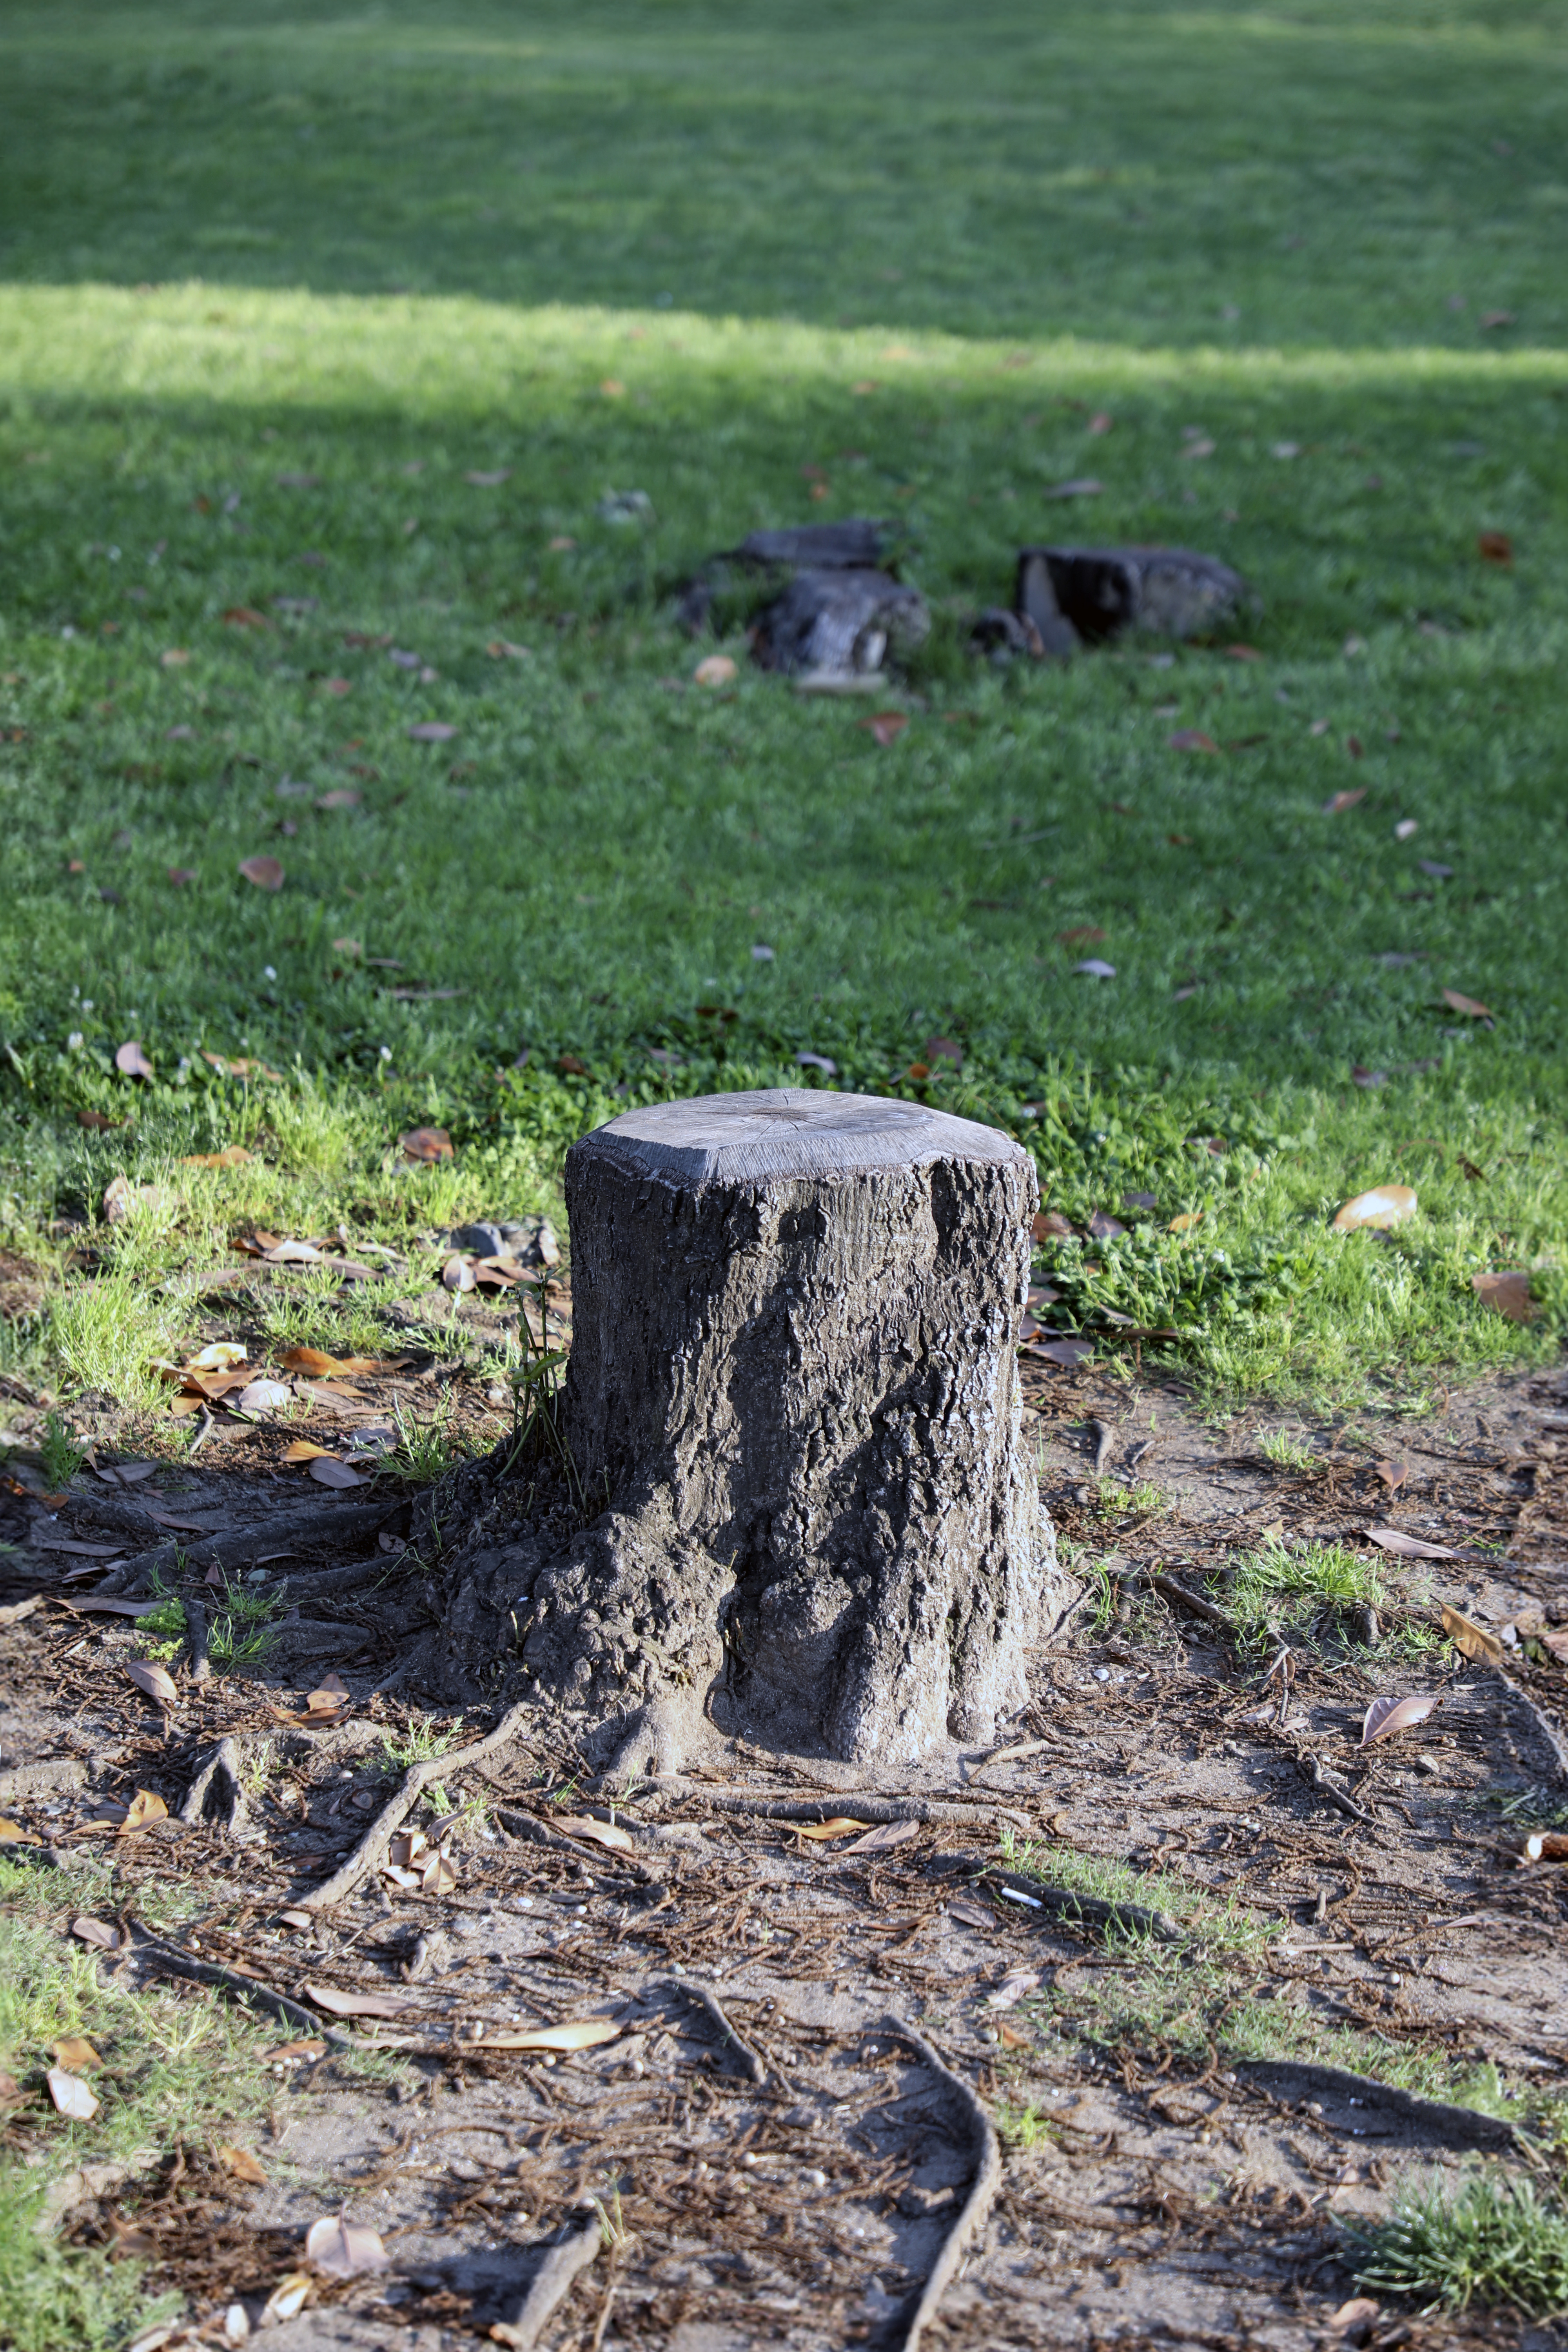 Tree stump in grassy area with sunlight, no persons in view